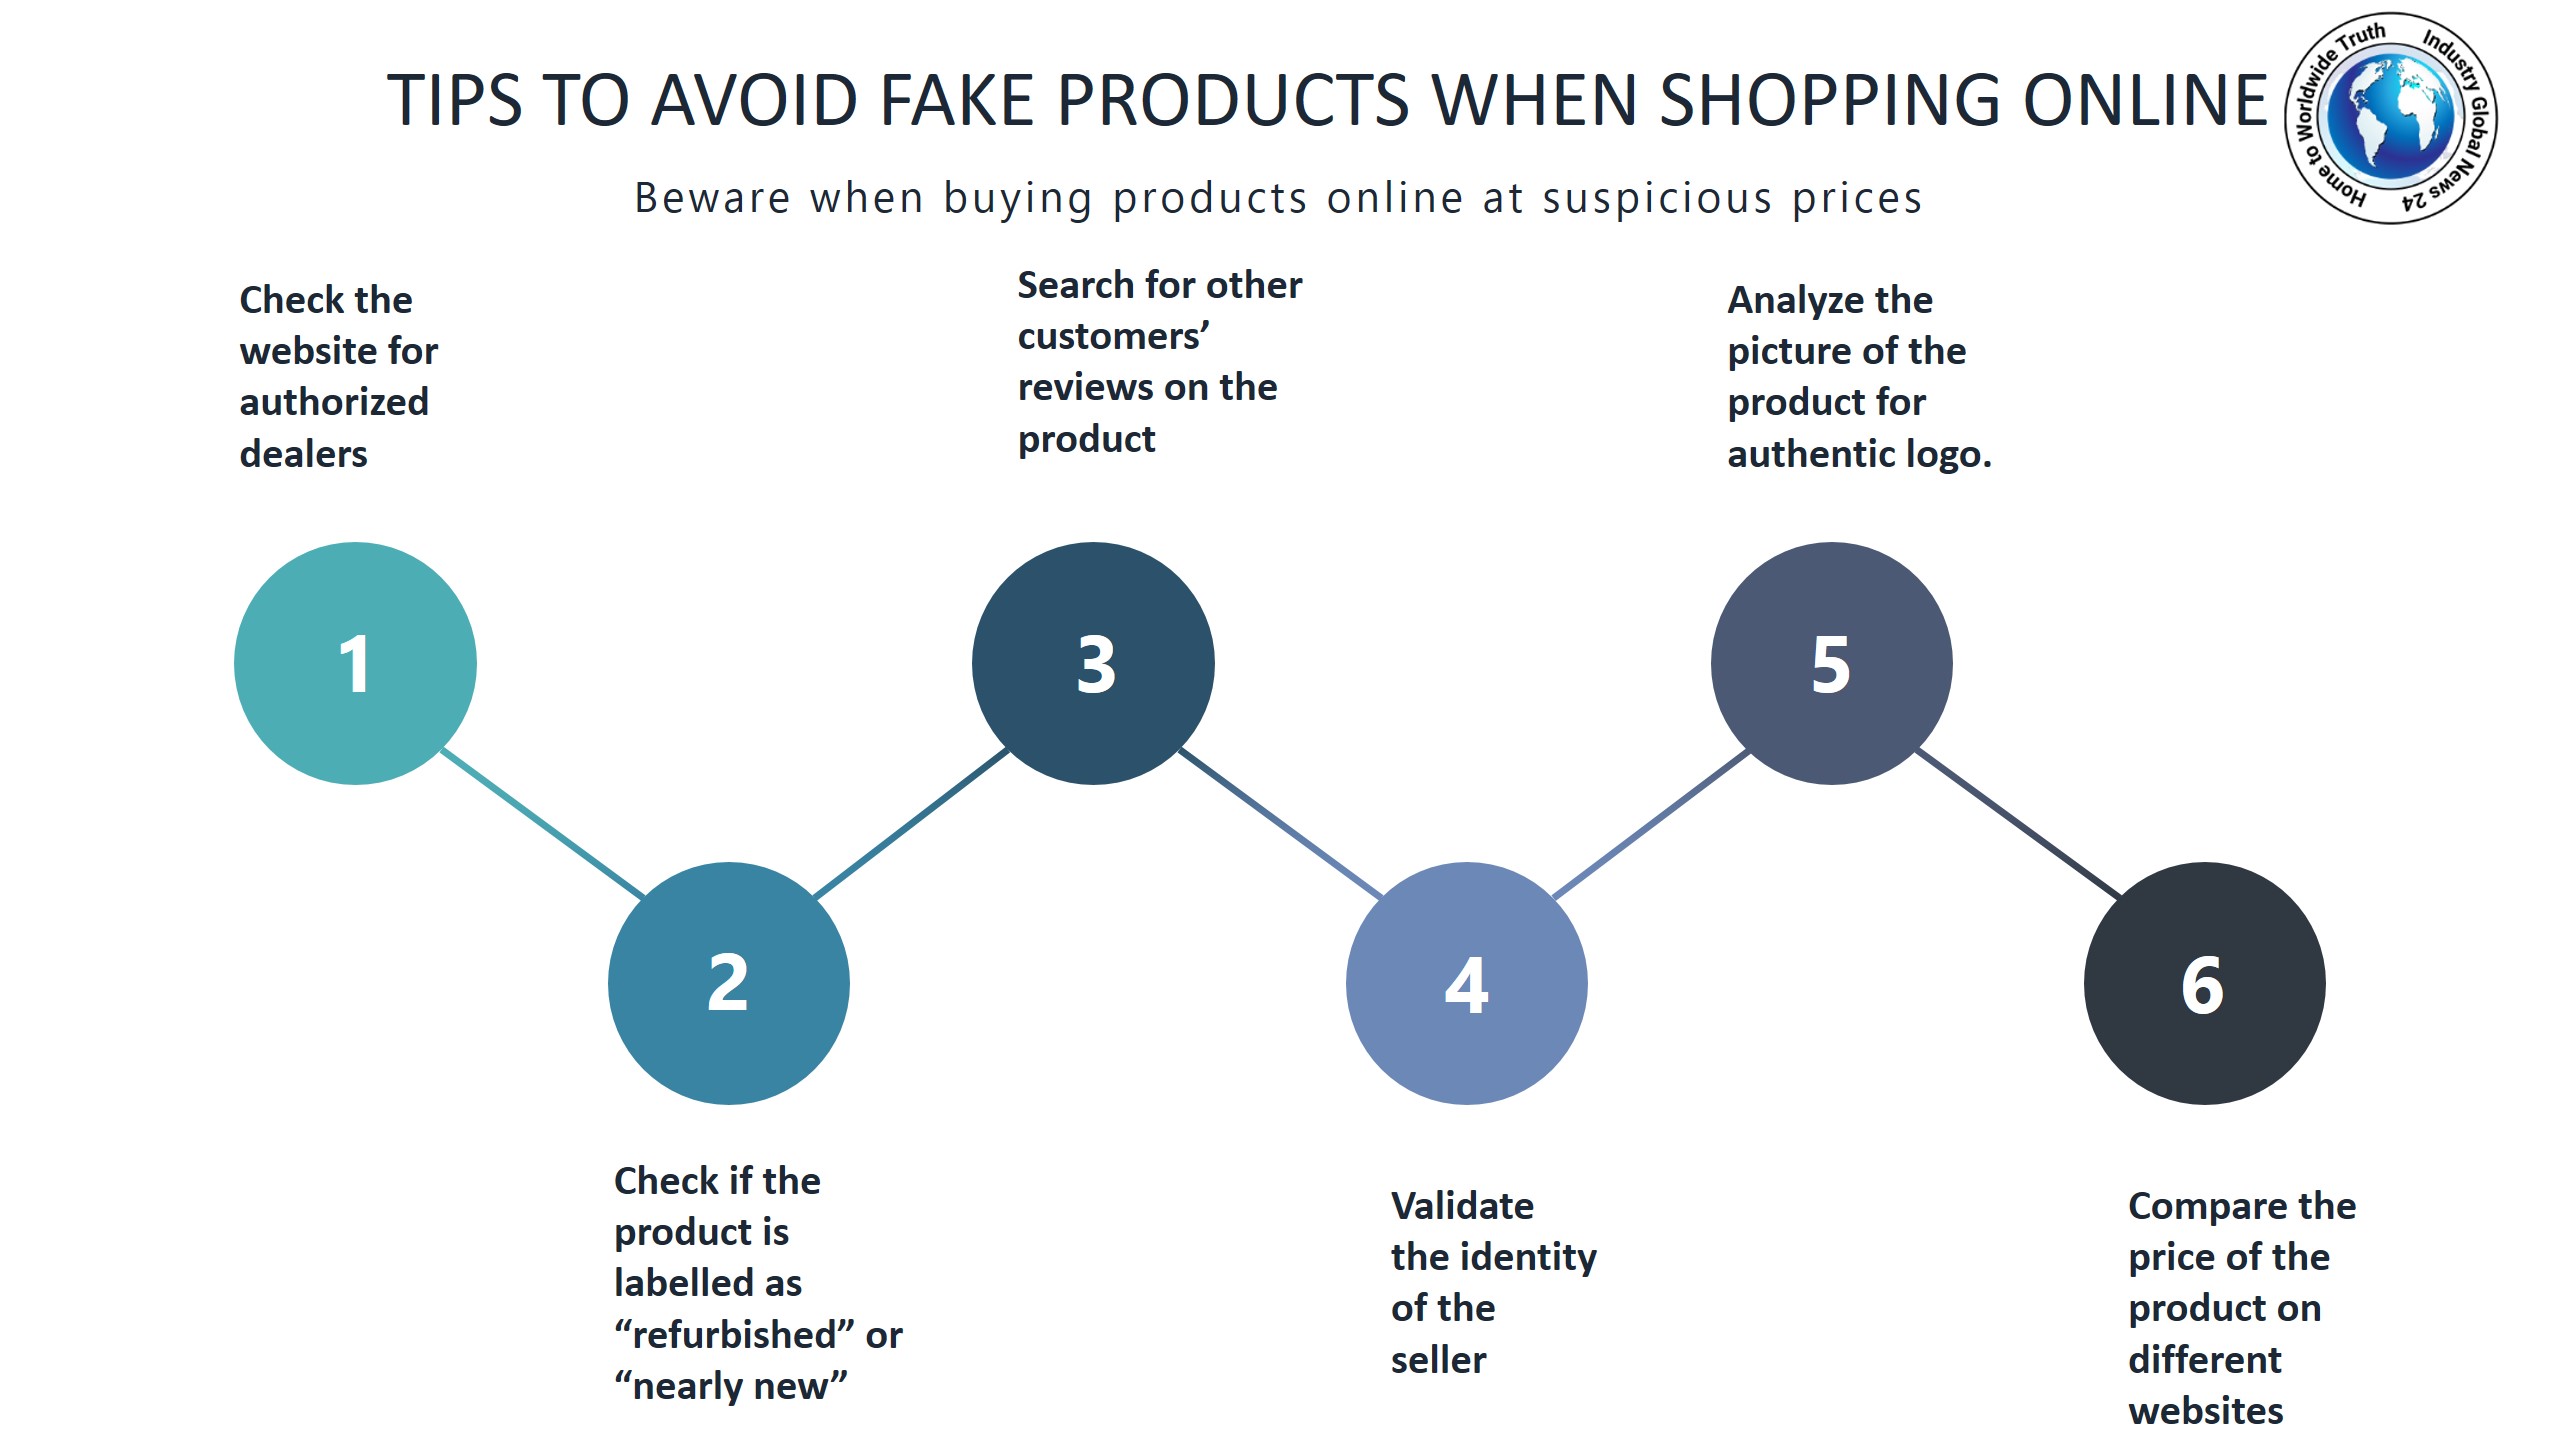 Tips to avoid fake products when shopping online